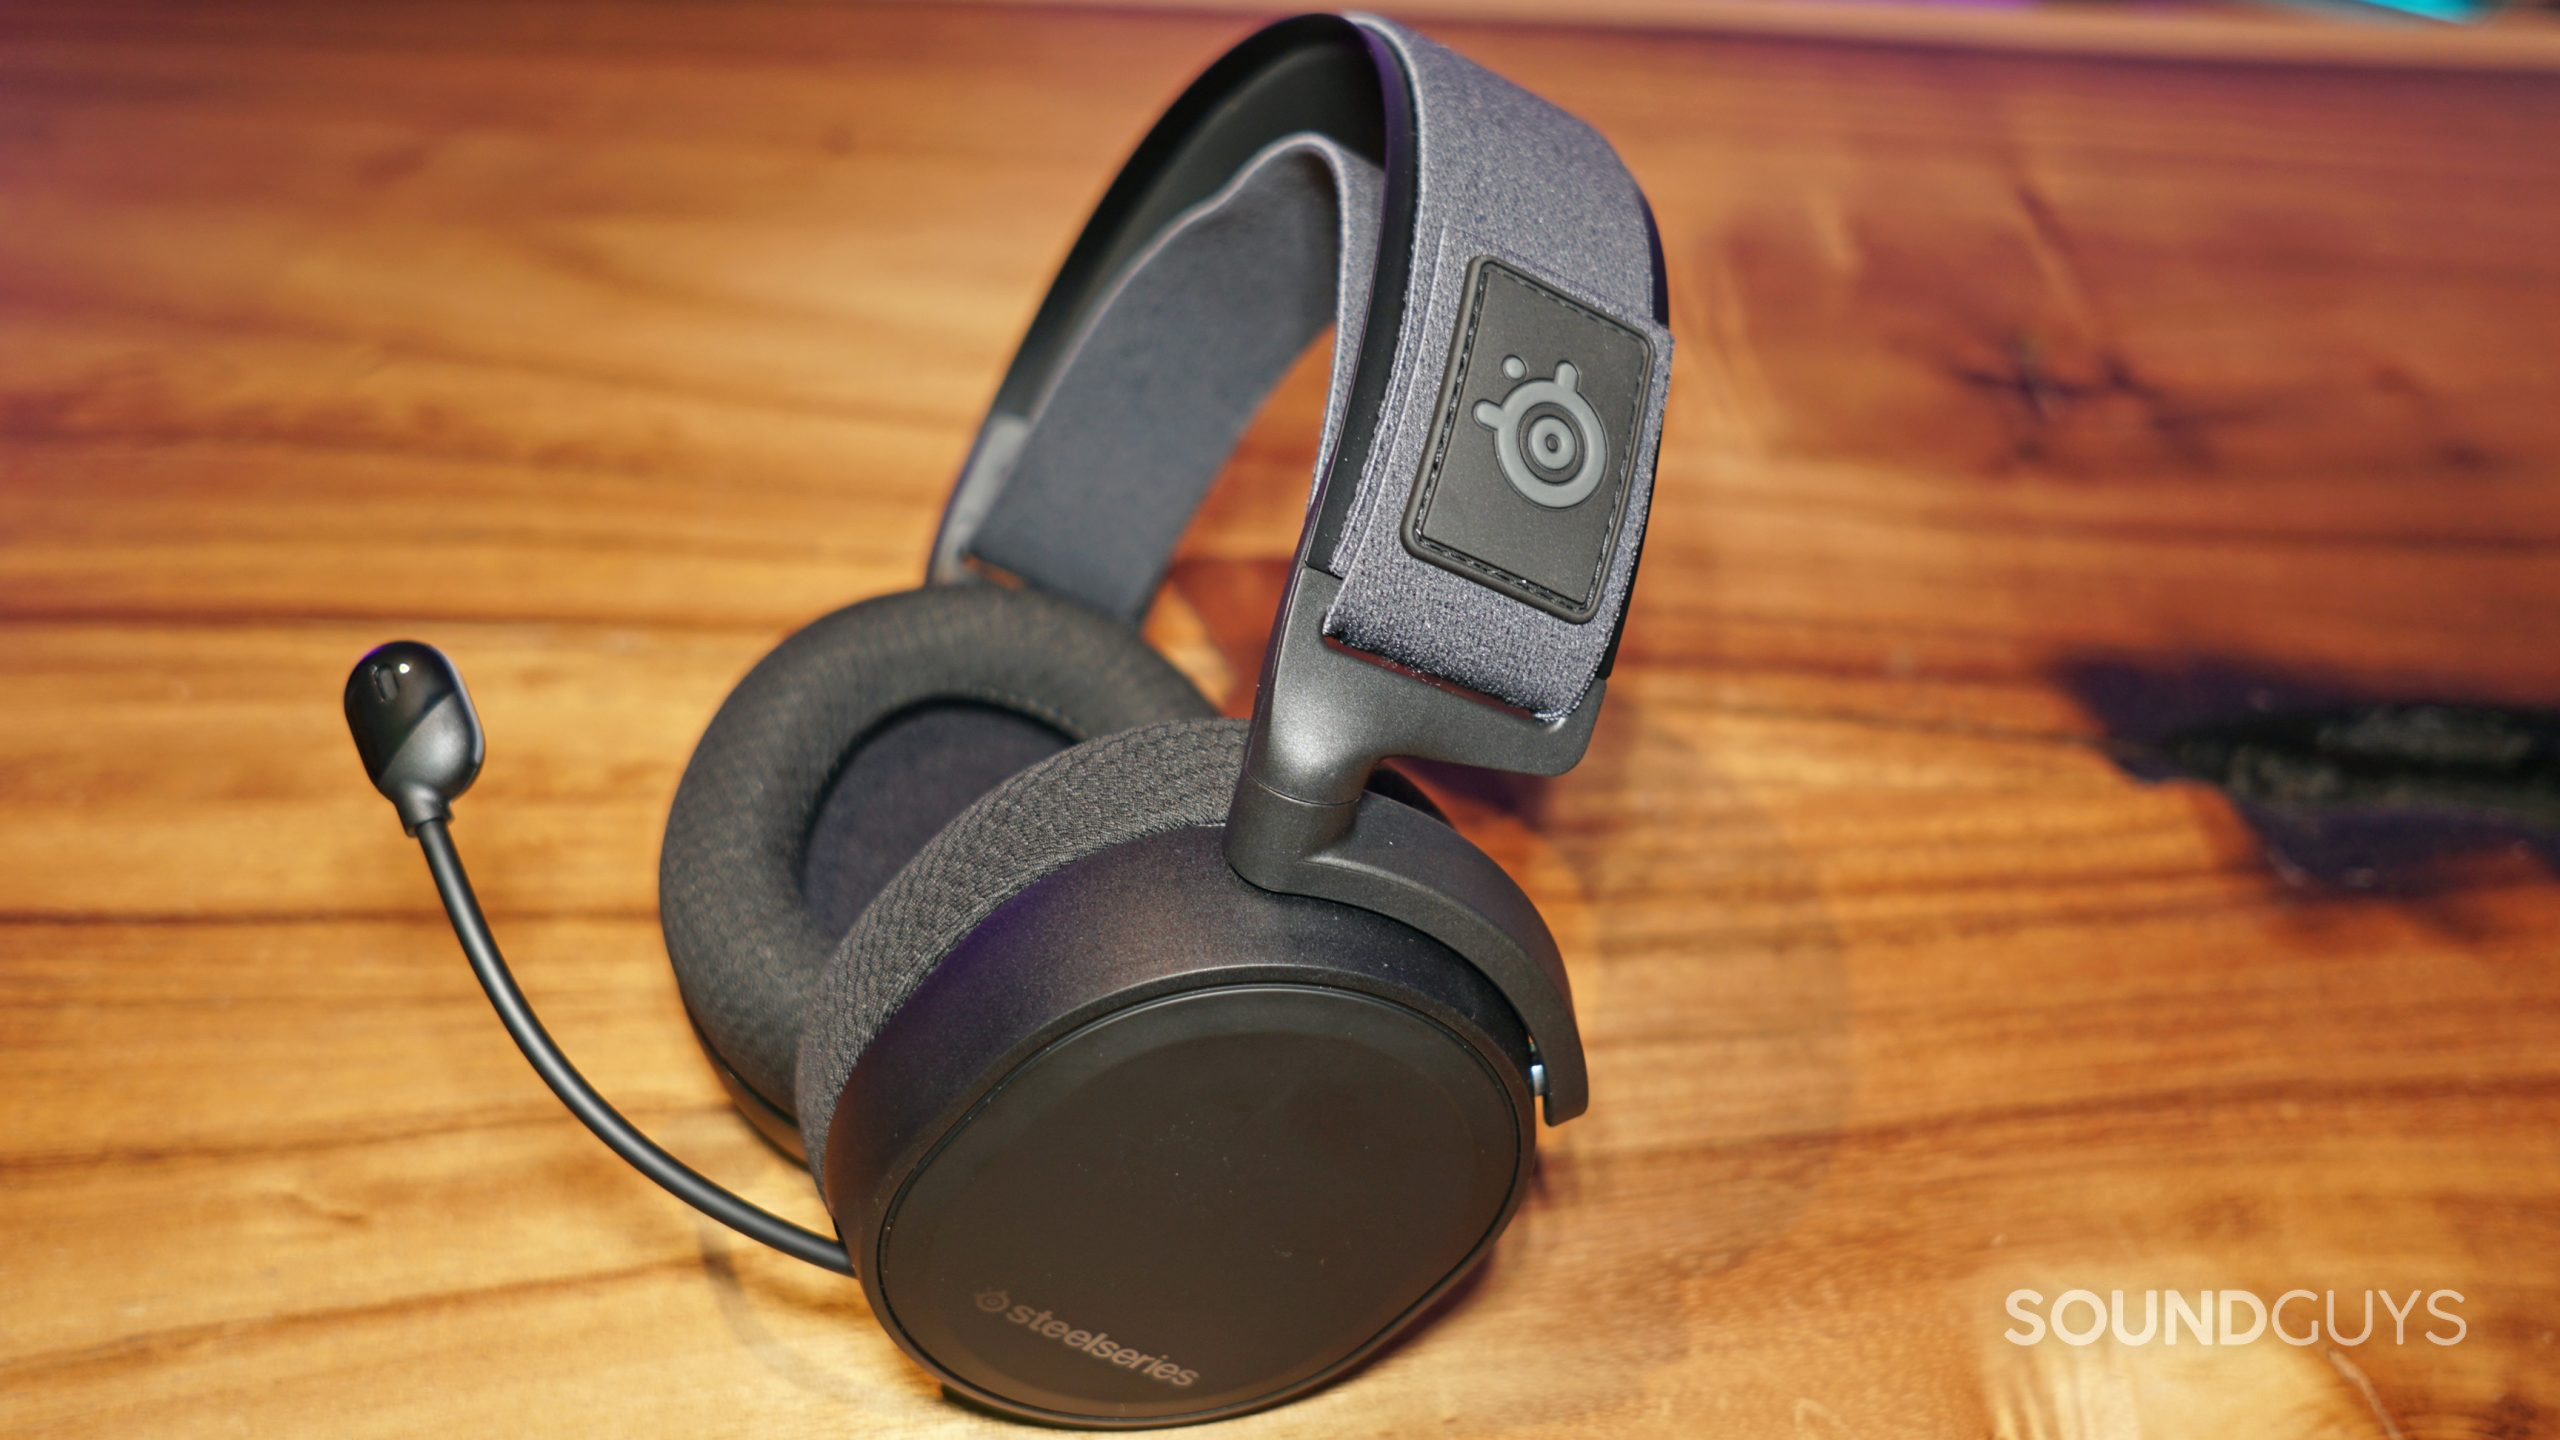 The SteelSeries Arctis 7+ lays on a wooden table.